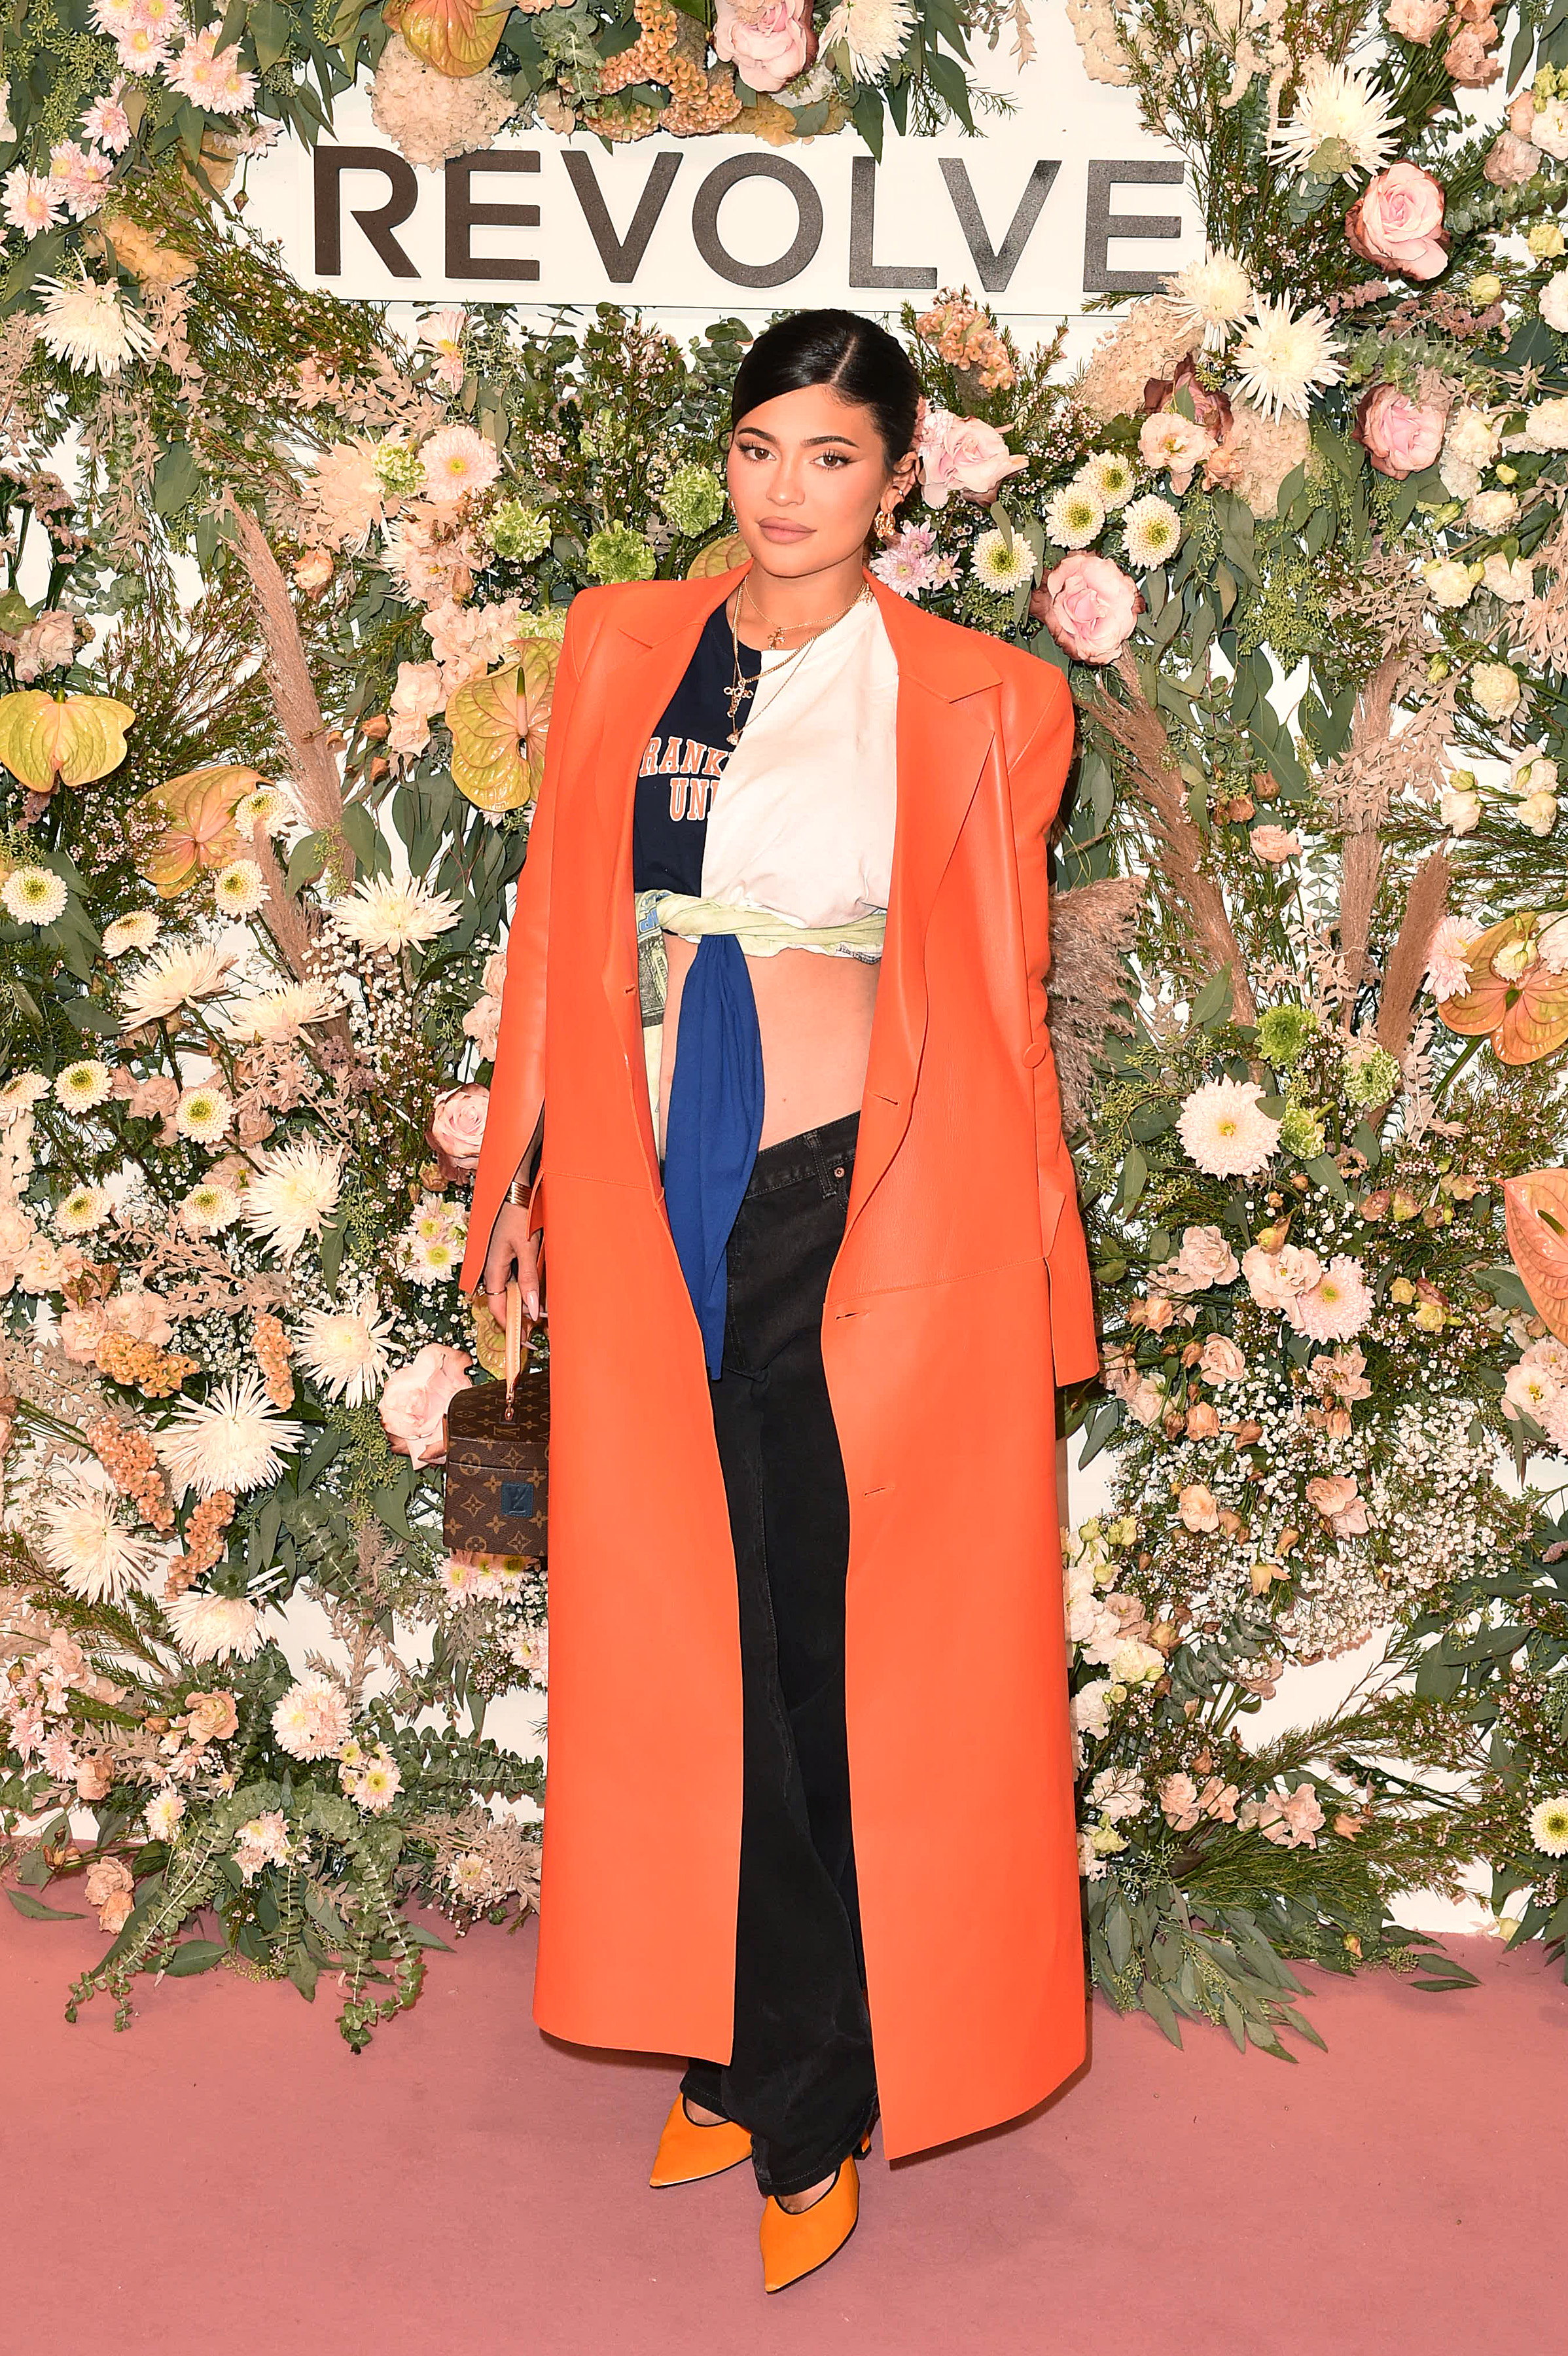 Close-up of Kylie posing at a media event against a floral background